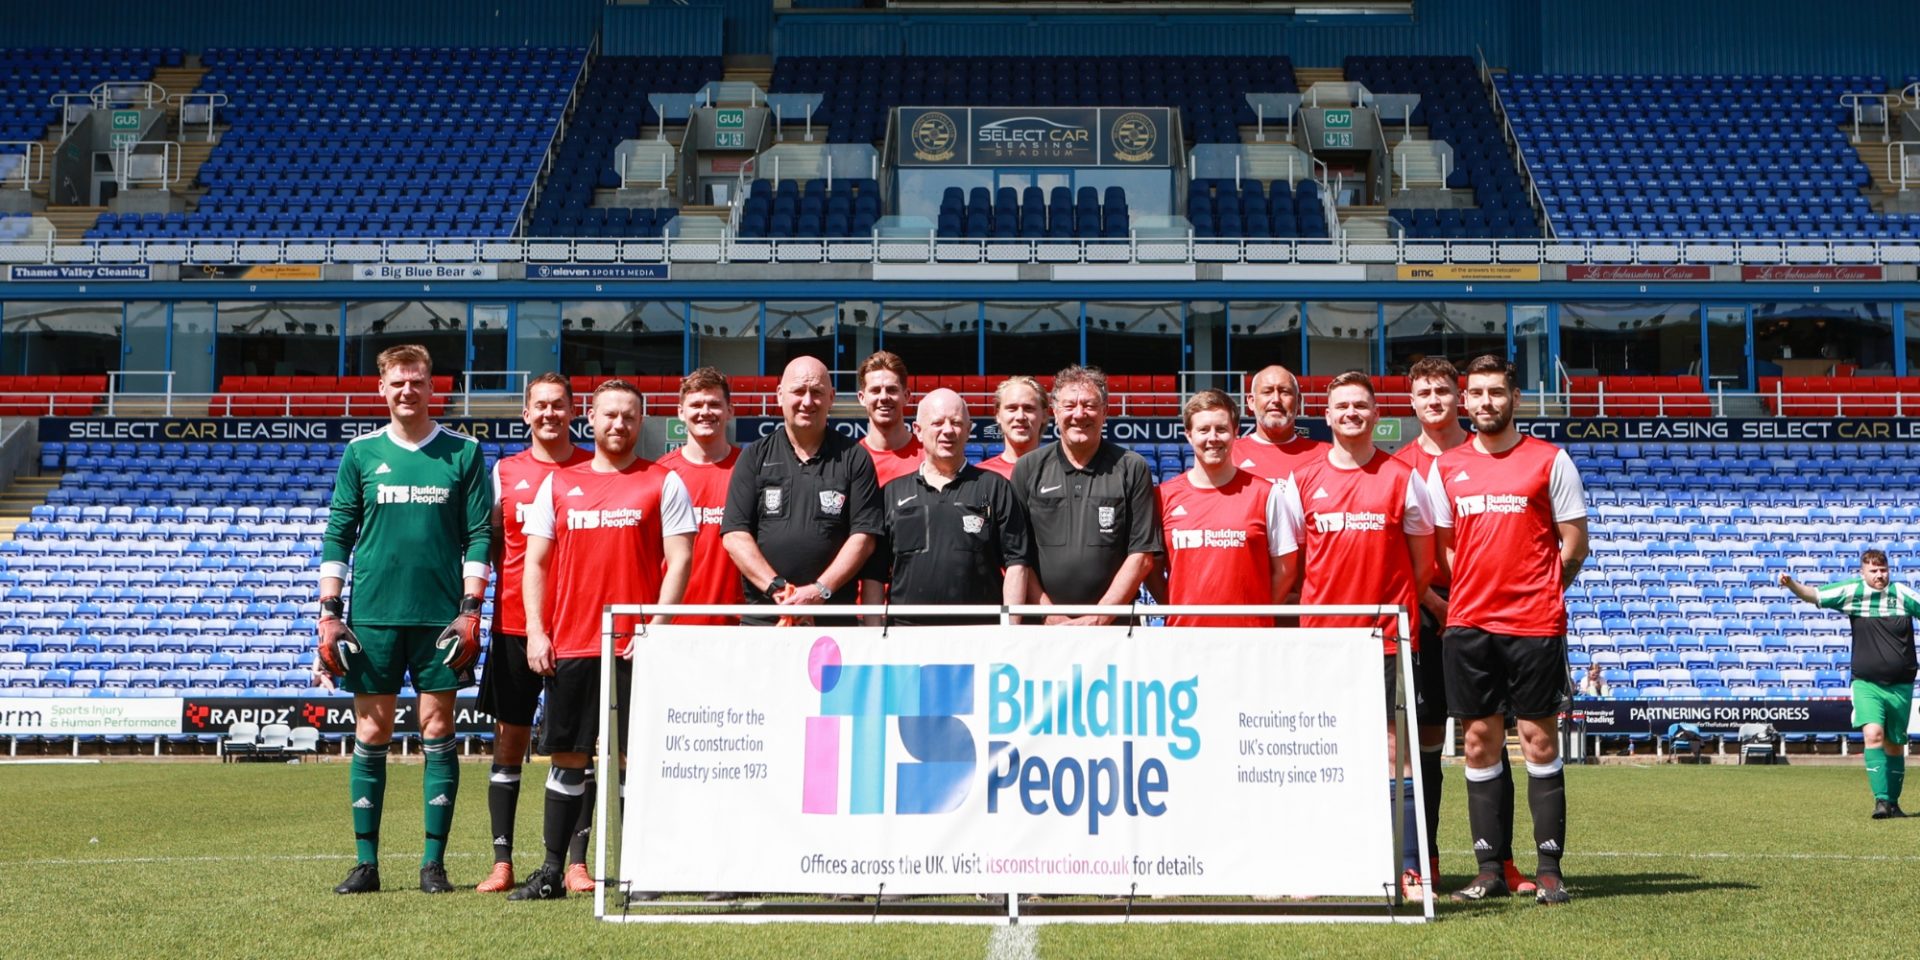 Footballers holding an ITS Building People banner in a football stadium